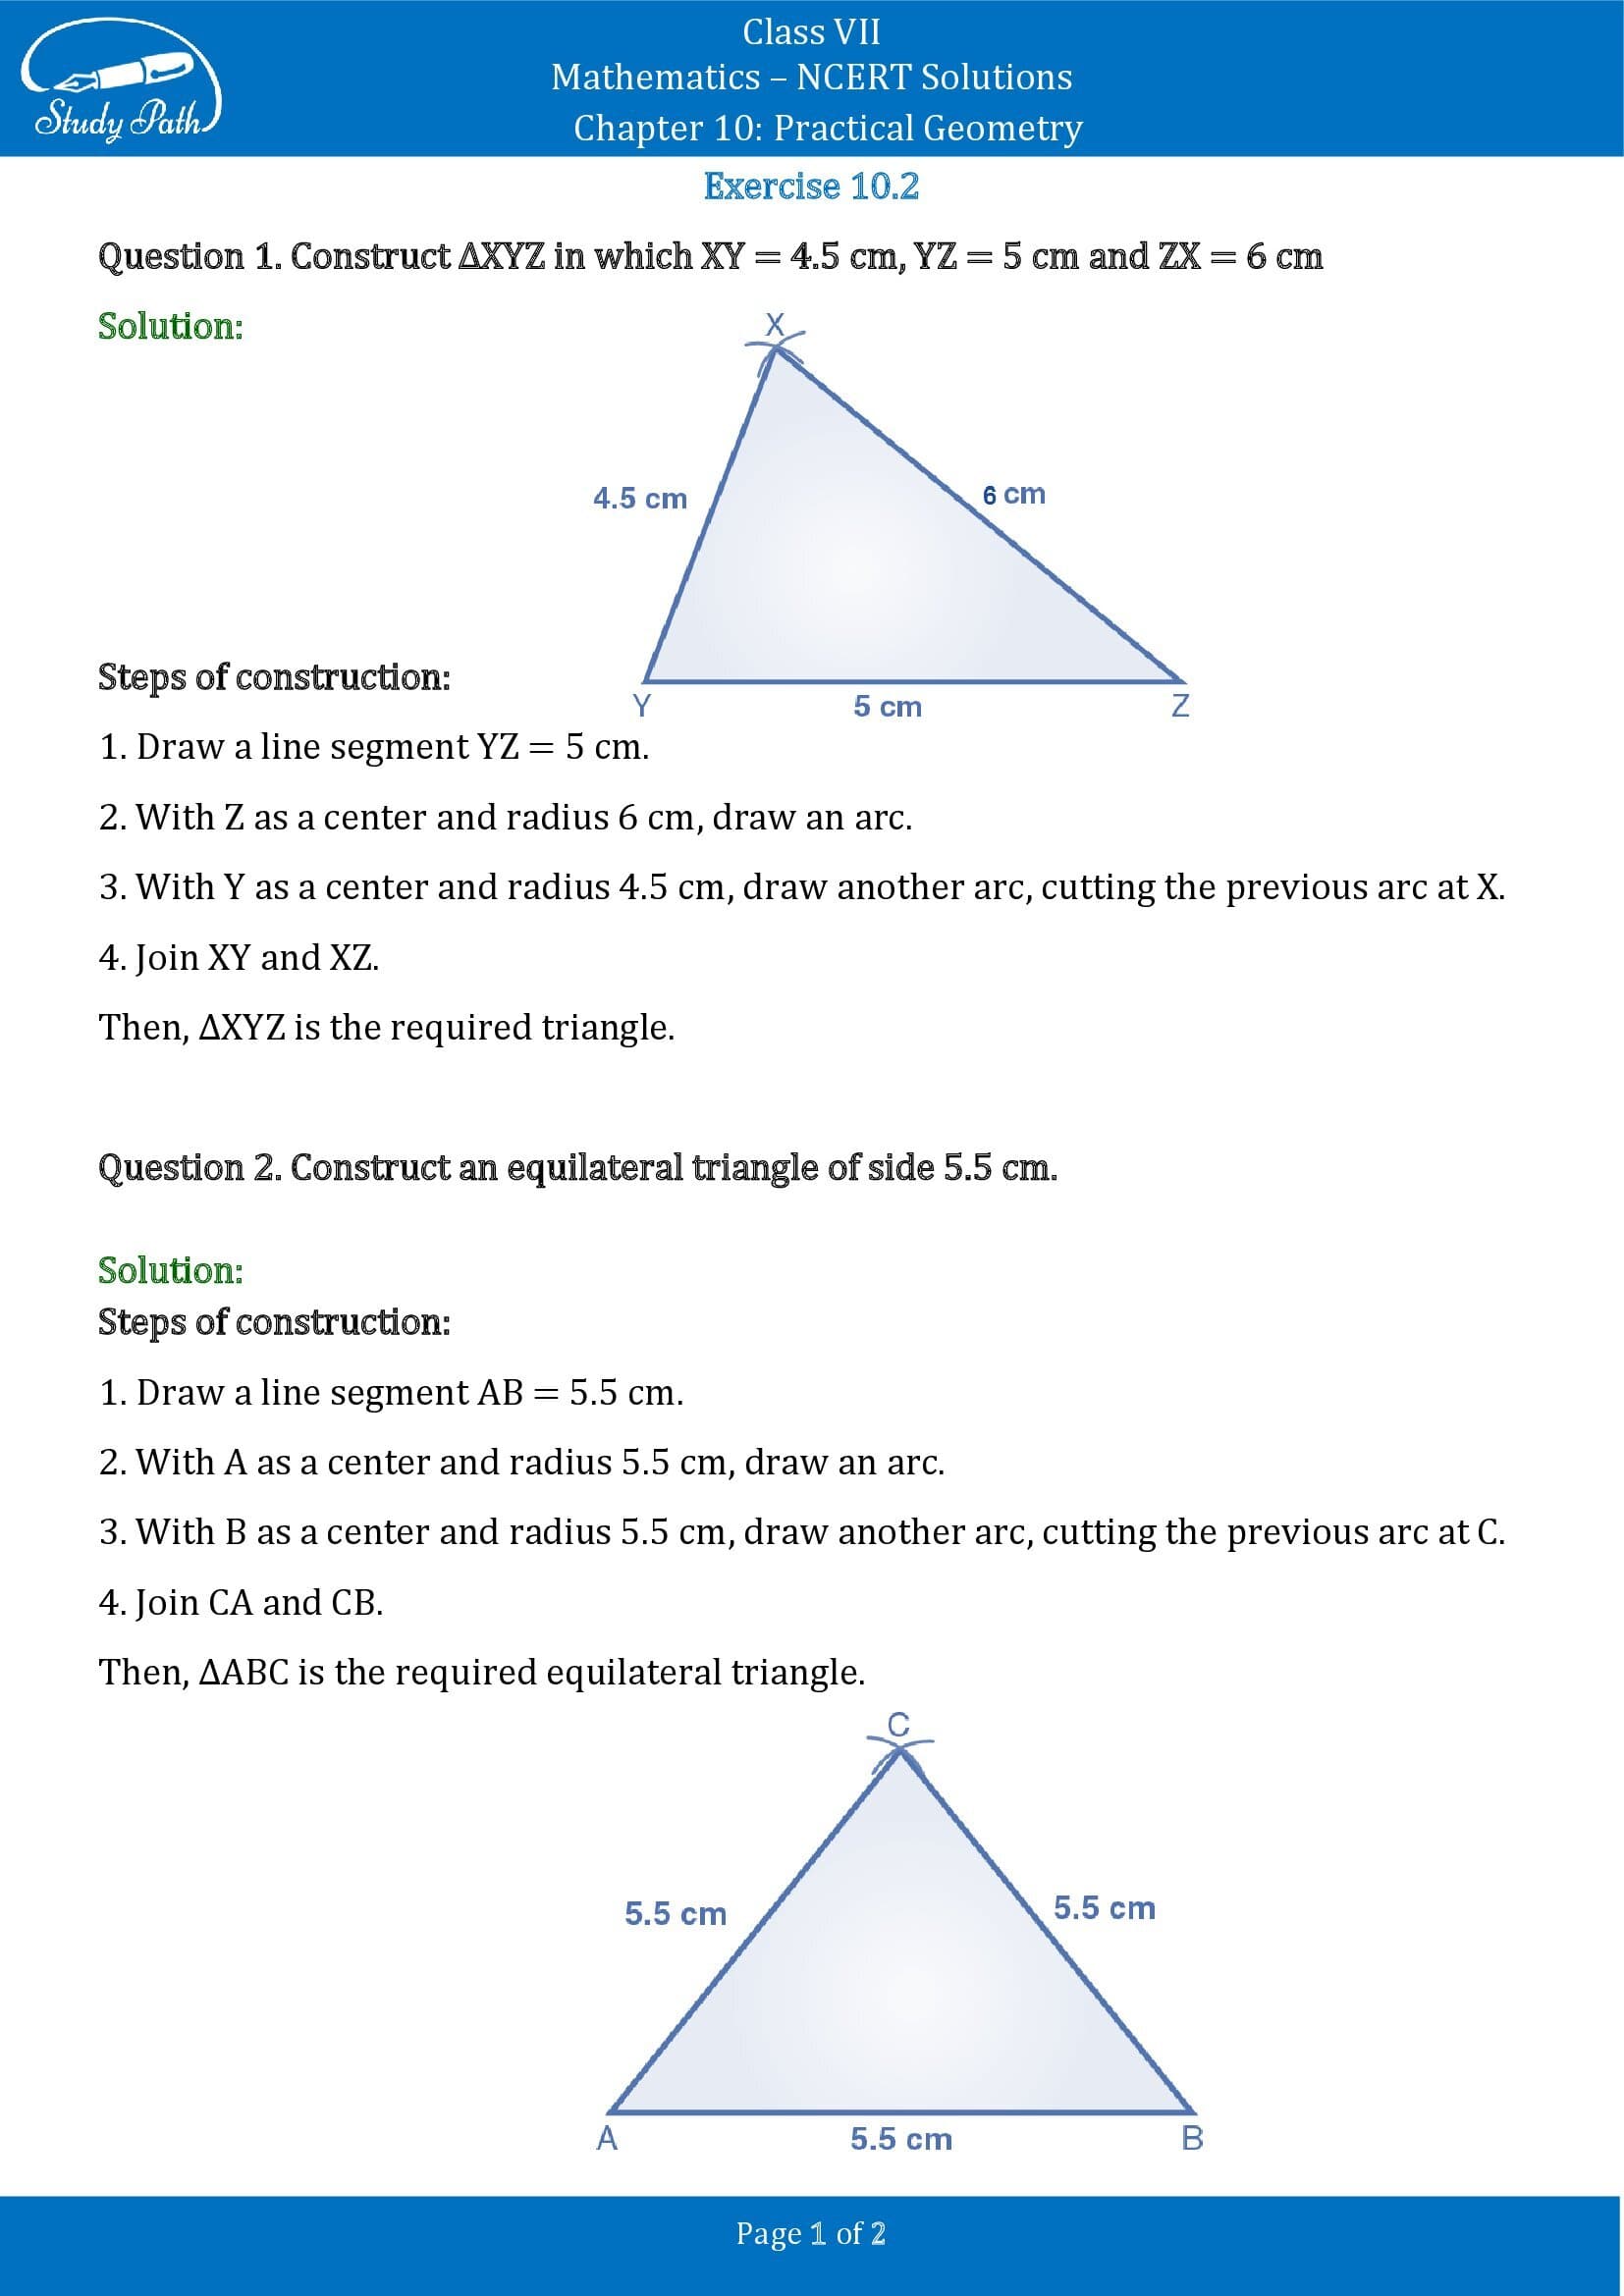 NCERT Solutions for Class 7 Maths Chapter 10 Practical Geometry Exercise 10.2 00001